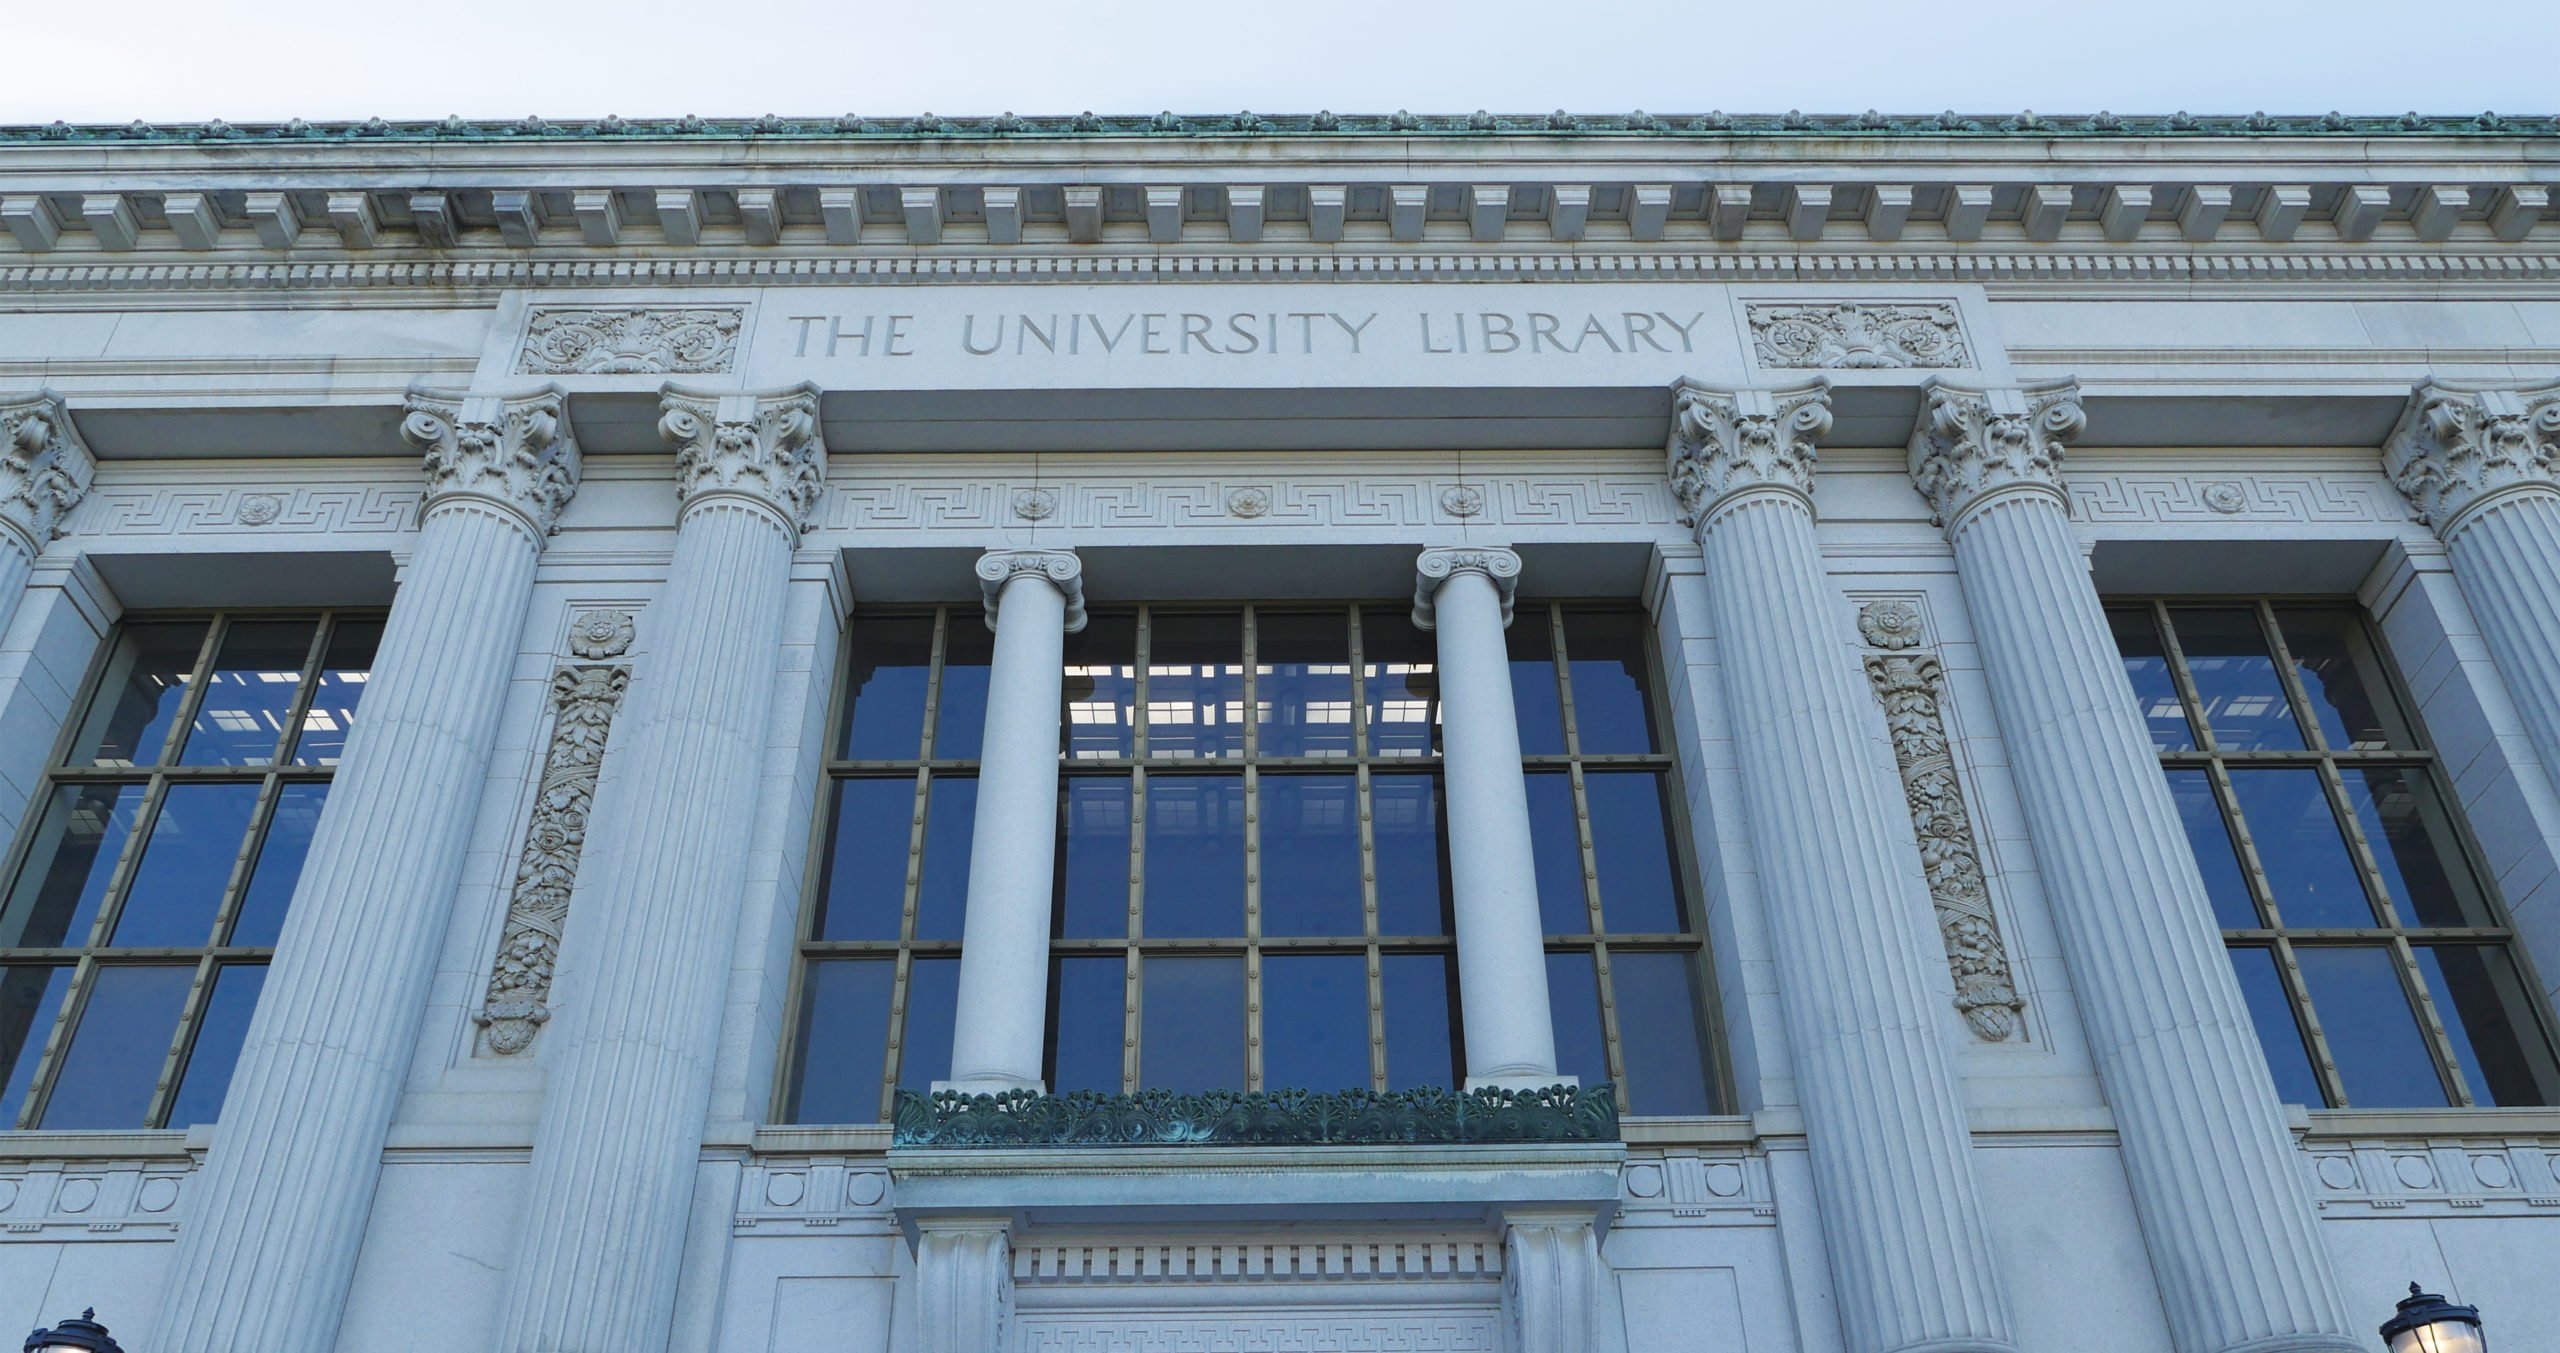 The University Library front facade.